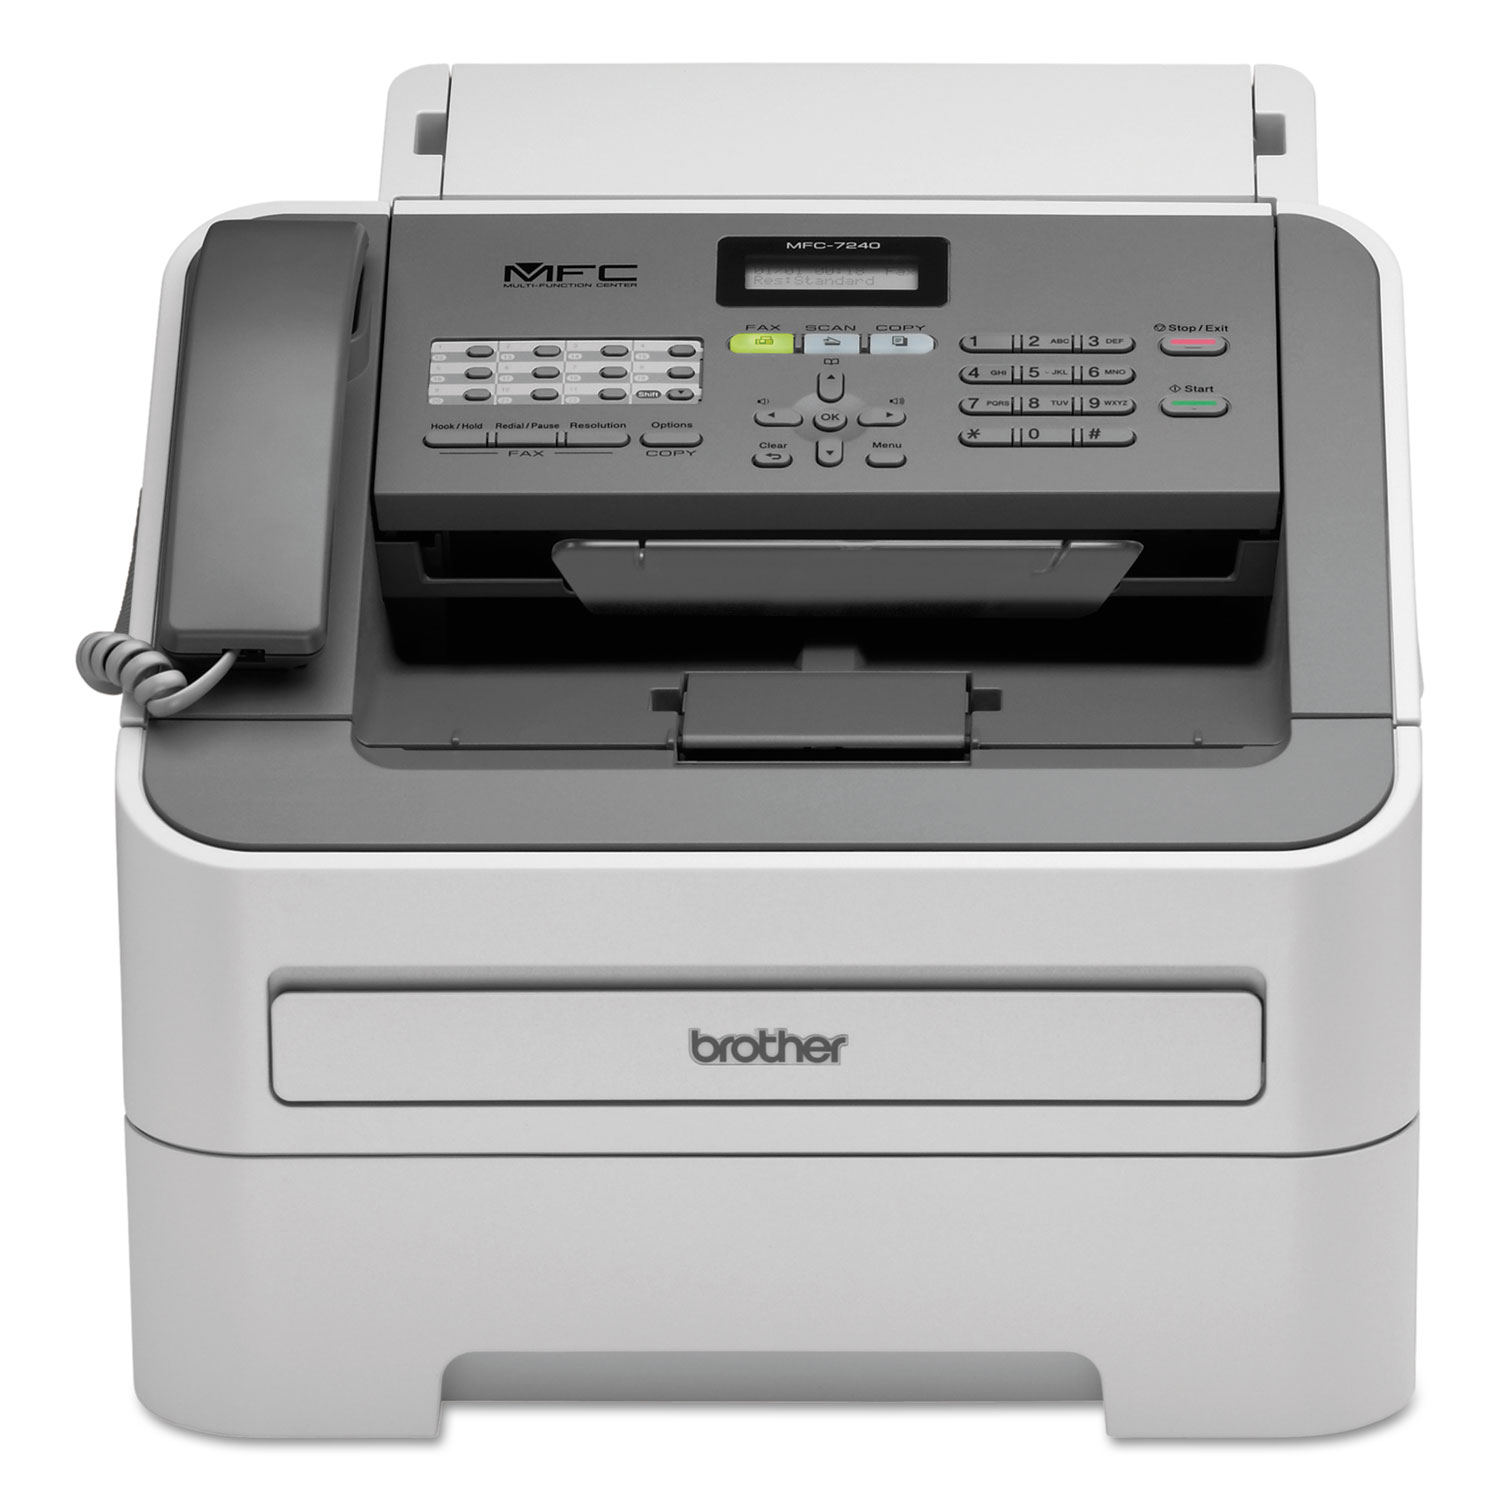  Brother MFC7240 MFC7240 Compact Laser All-in-One (BRTMFC7240) 